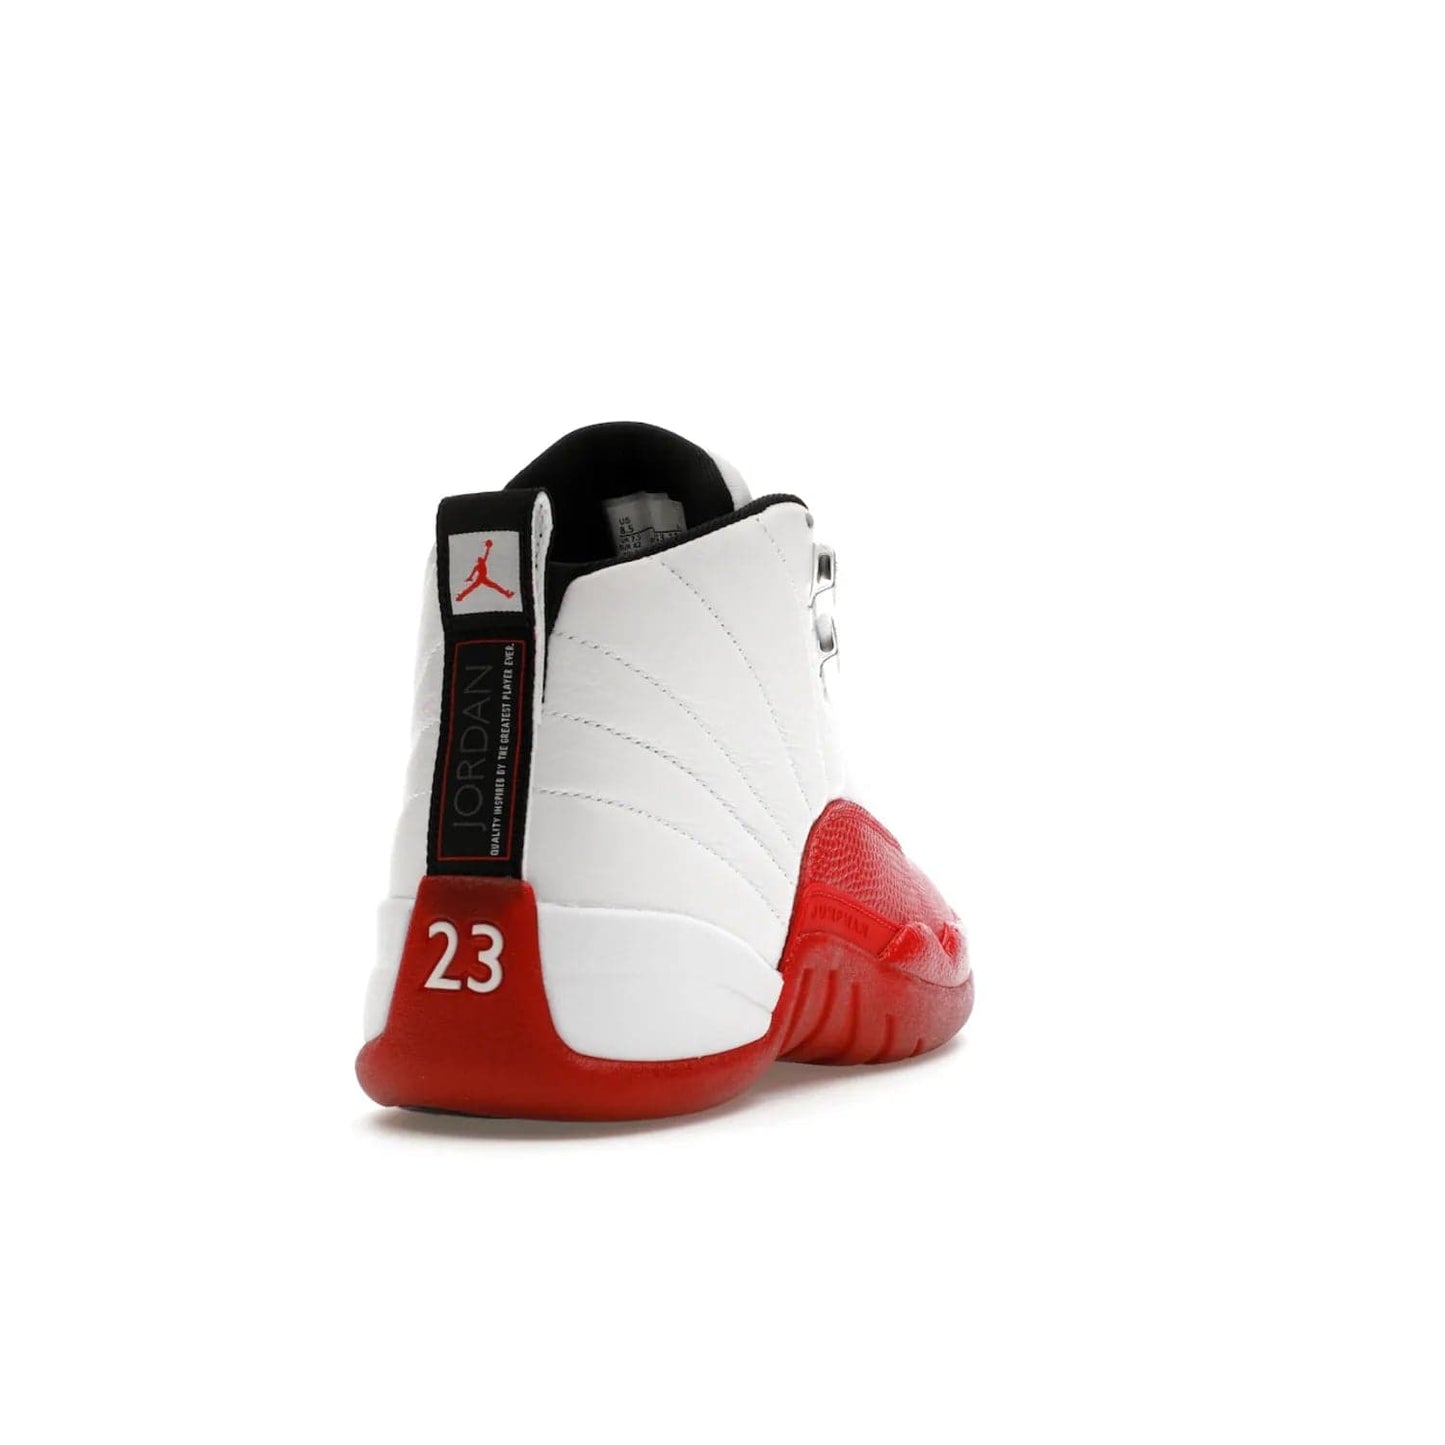 Jordan 12 Retro Cherry (2023) - Image 30 - Only at www.BallersClubKickz.com - Live your sneaker legend with the Jordan 12 Retro Cherry. Iconic pebbled leather mudguards, quilted uppers, and varsity red accents make this 1997 classic a must-have for 2023. Shine on with silver hardware and matching midsoles, and bring it all together for limited-edition style on October 28th. Step into Jordan legacy with the Retro Cherry.